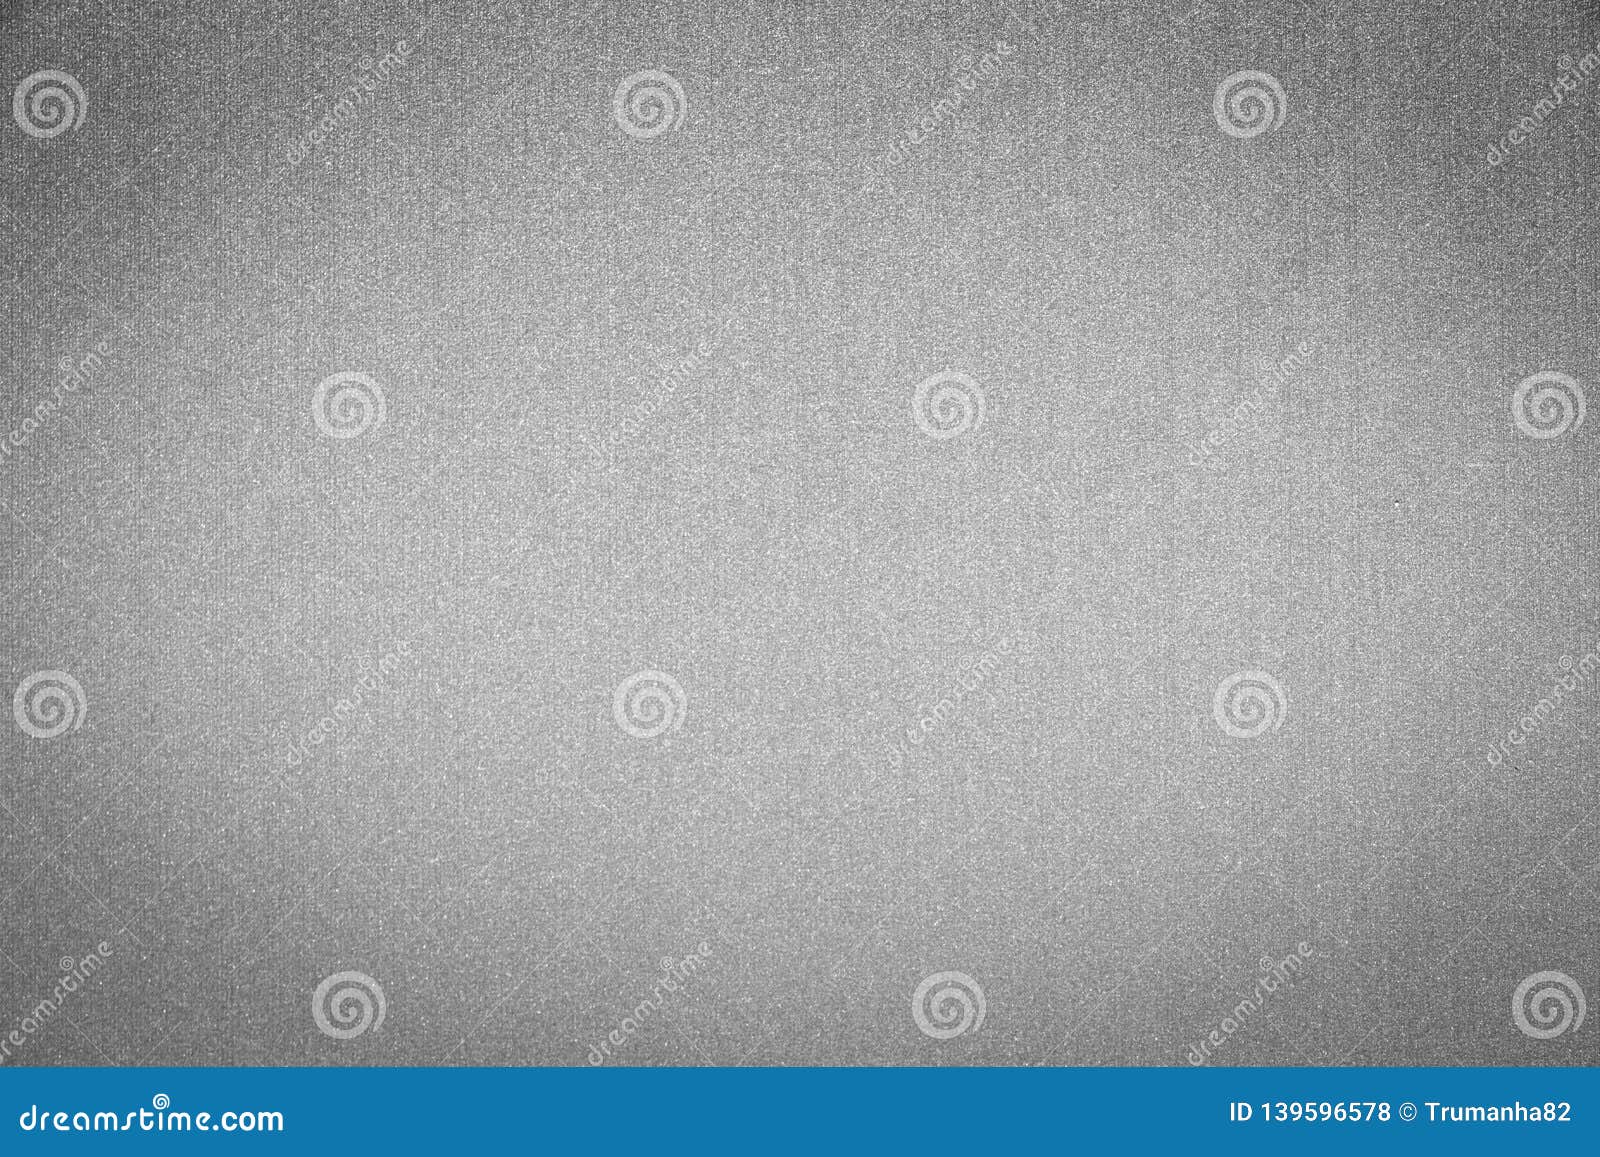 Brushed Grey Metal Surface for Abstract Background Stock Photo - Image ...